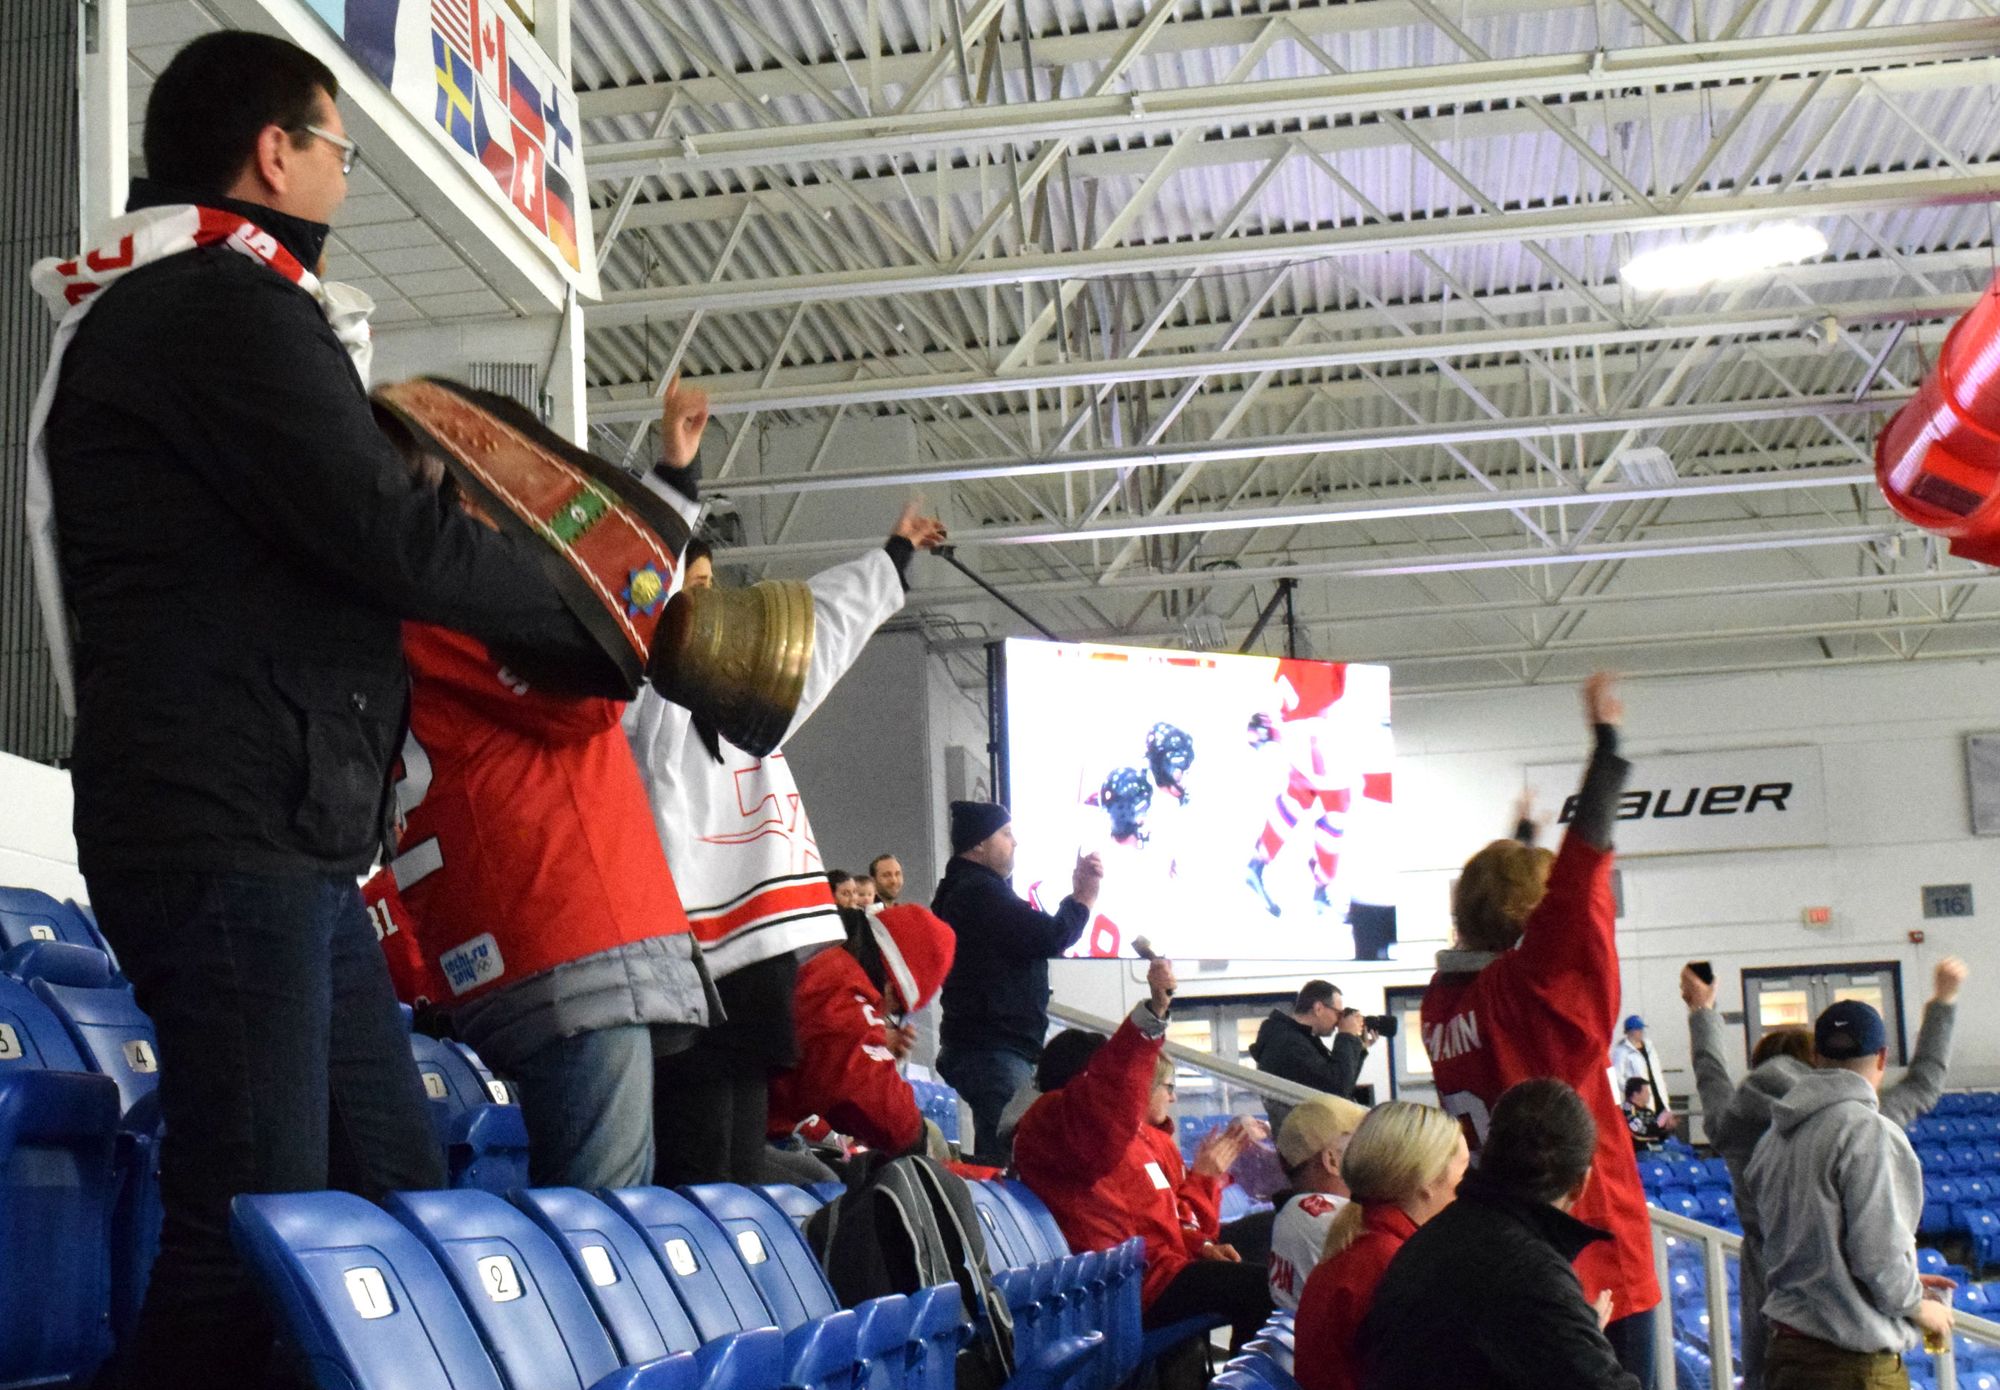 Swiss supporters at the Women's Worlds in Plymouth in 2017. Many people in red are standing and cheering but the foreground of the photograph shows a person with a large brass-colored bell swinging it around.